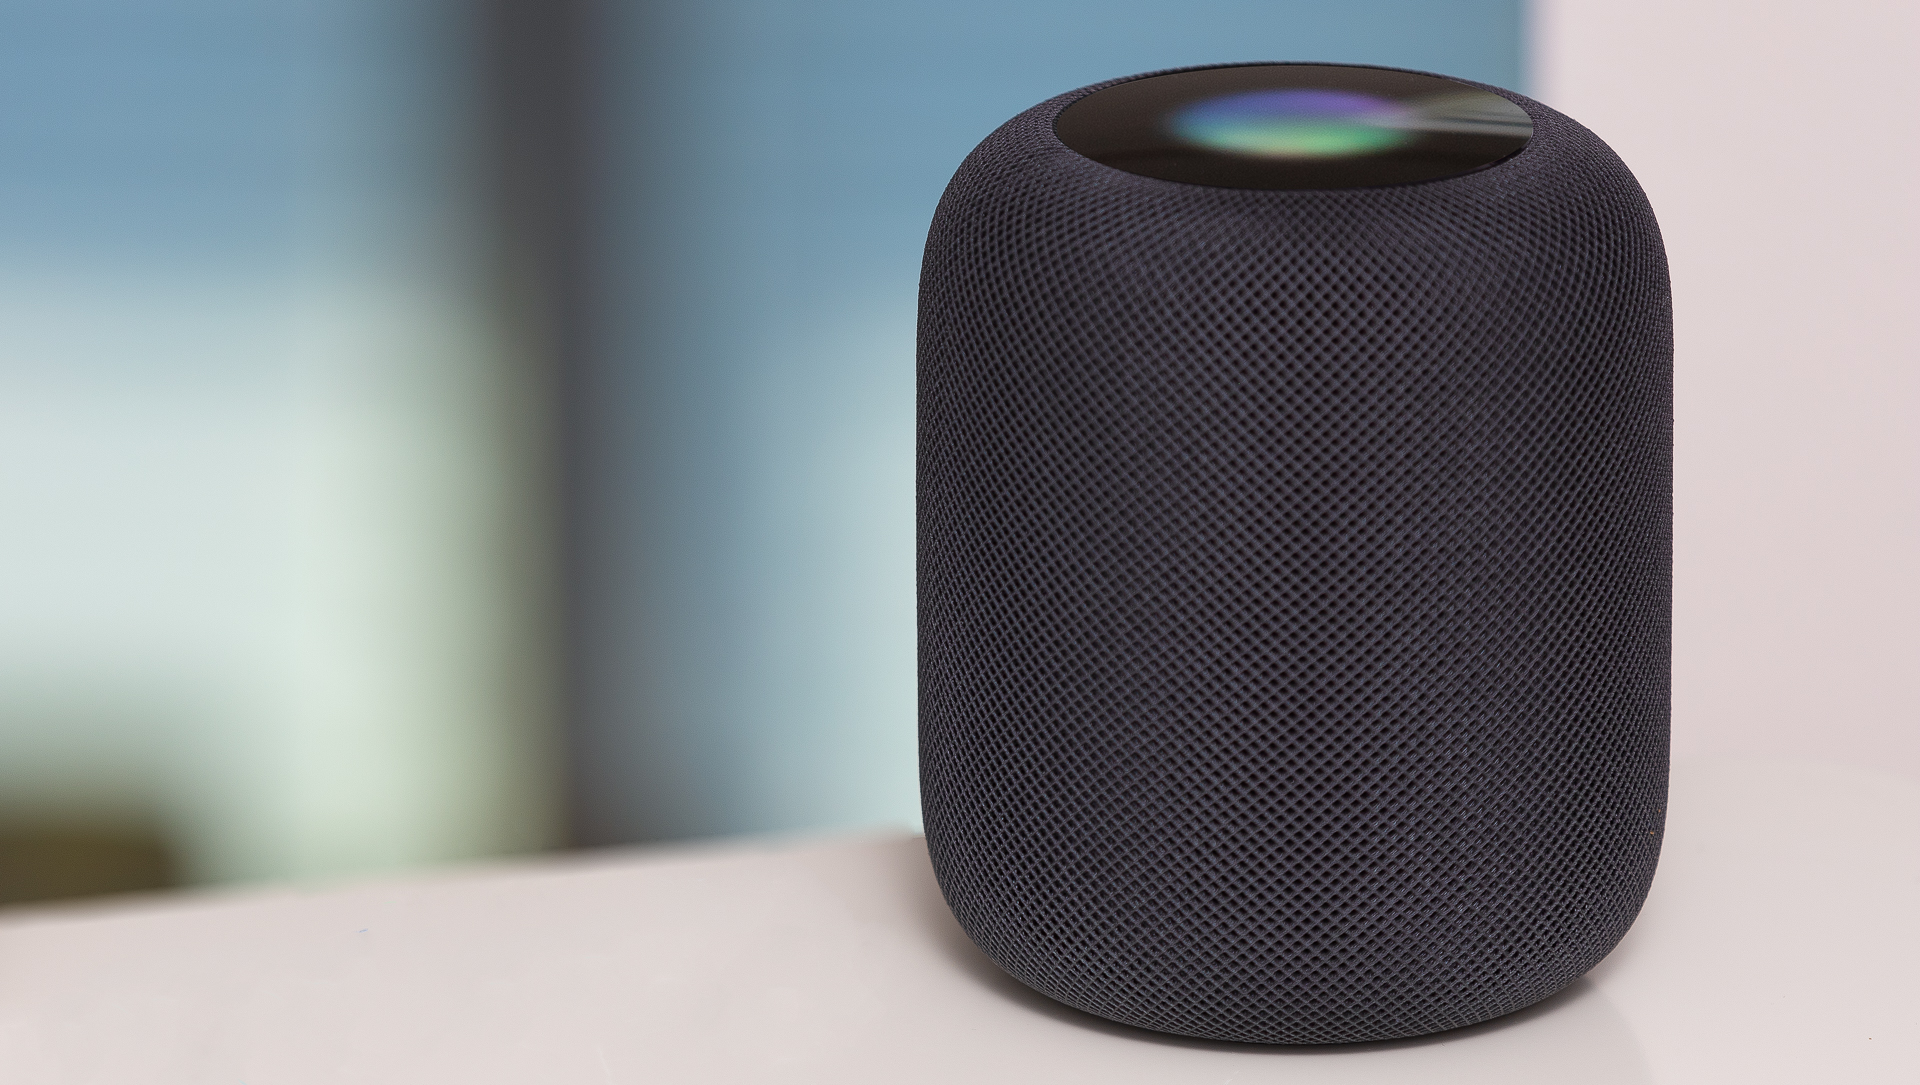 Smart speakers are a wise upgrade. Here, the original Apple HomePod that supports the Apple Siri digital voice assistant. Image: Digitized House.